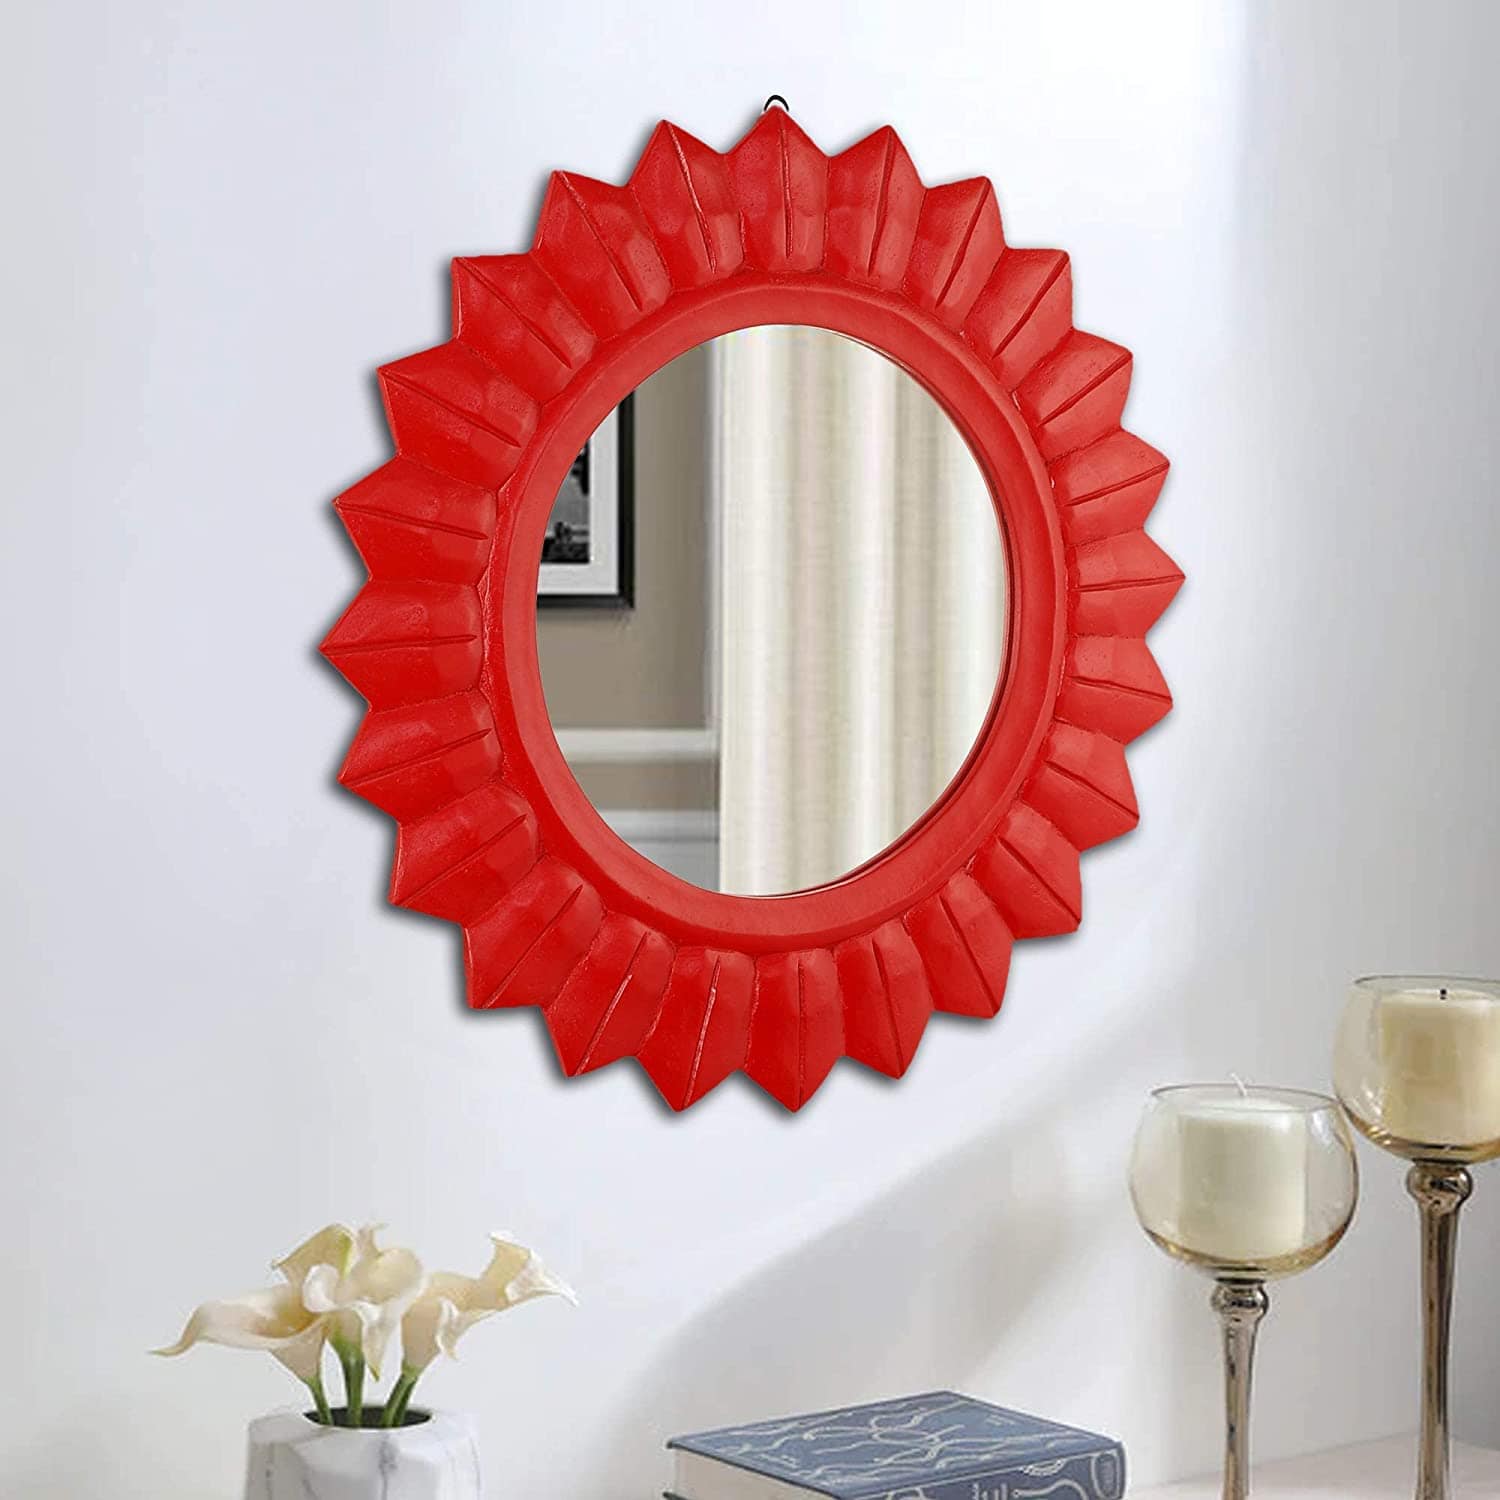 Handcrafted Wood Wall Mirror (50.8 cm x 50.8 cm x 2.5 cm, Red)